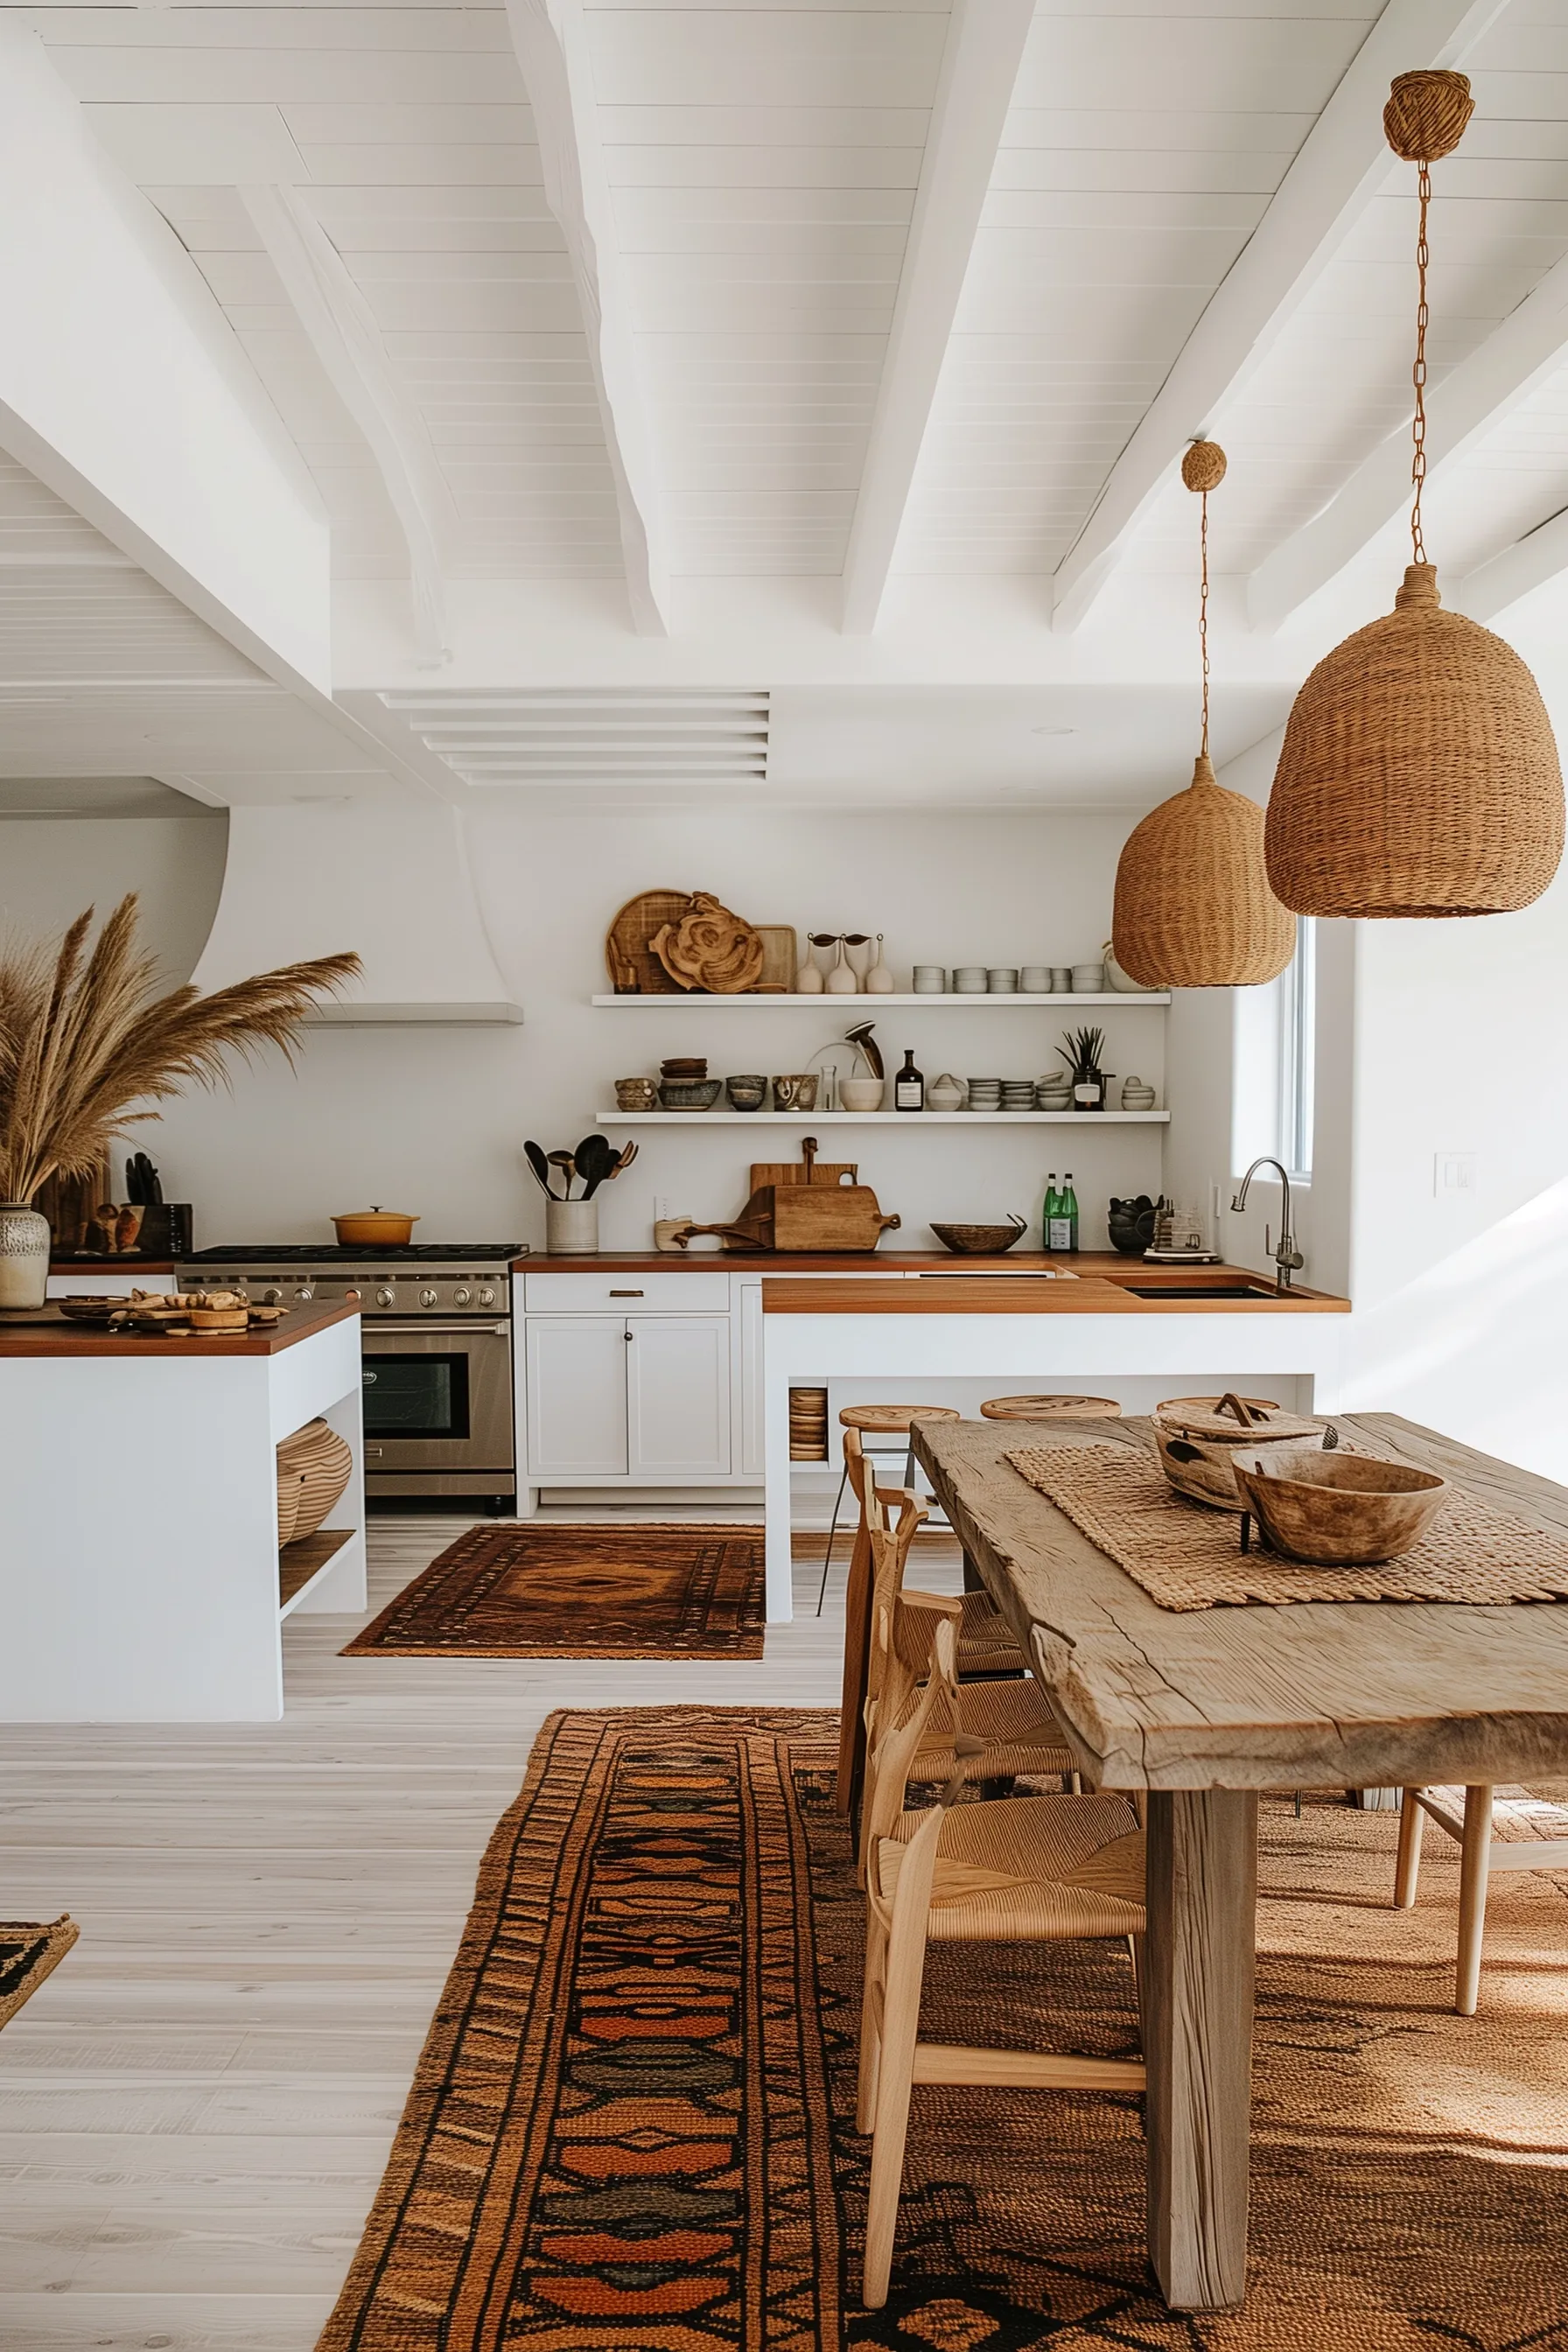 A white kitchen with Boho accents and pendant lighting